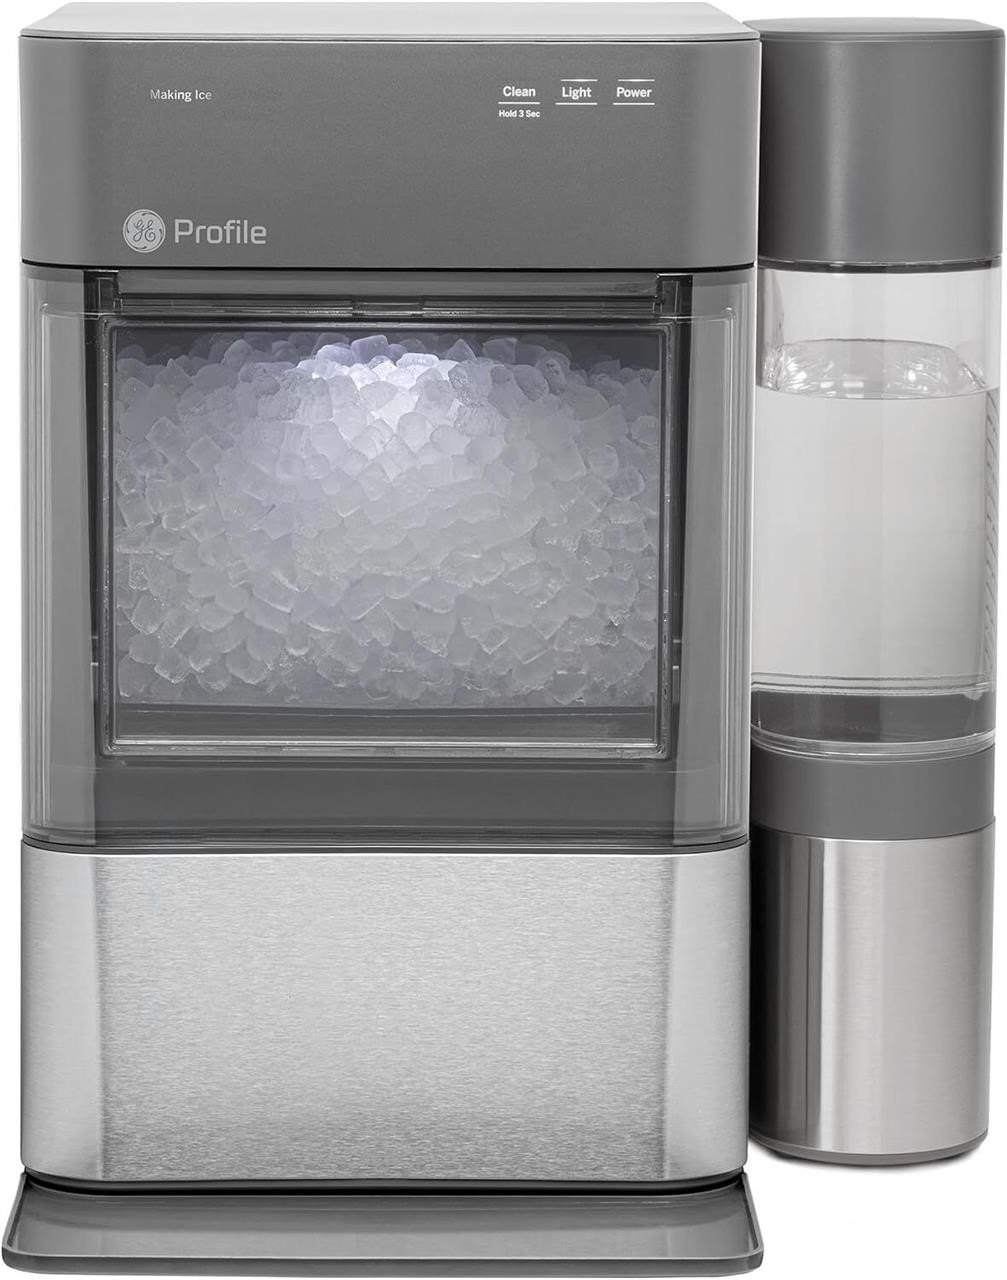 GE Profile Opal 2.0XL Ice Maker  Stainless Steel